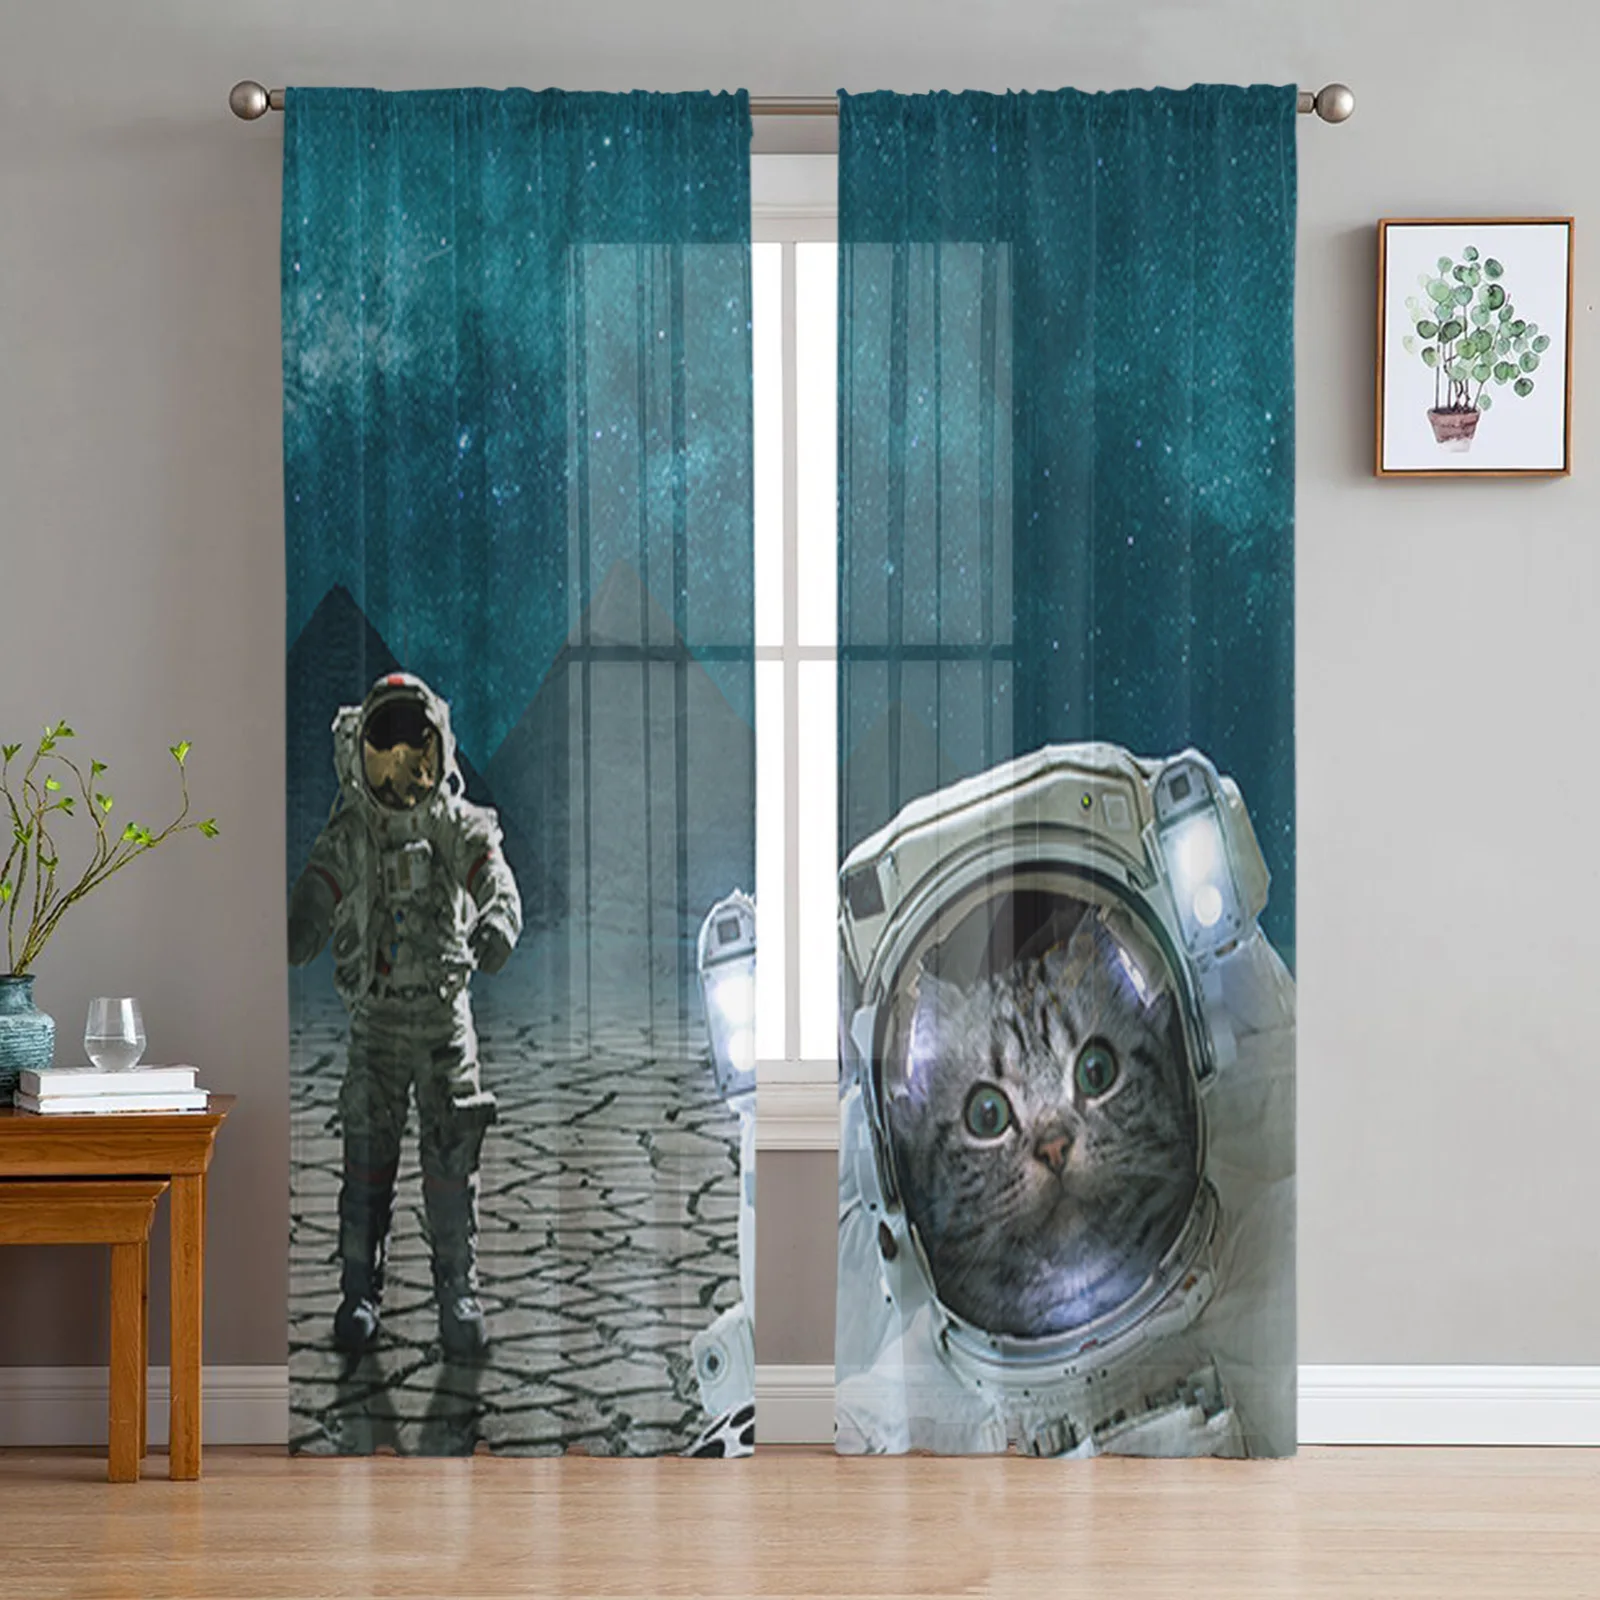 

Astronaut Pyramid Space Universe Cat Chiffon Sheer Curtains for Living Room Bedroom Home Decor Window Voile Tulle Curtain Drapes